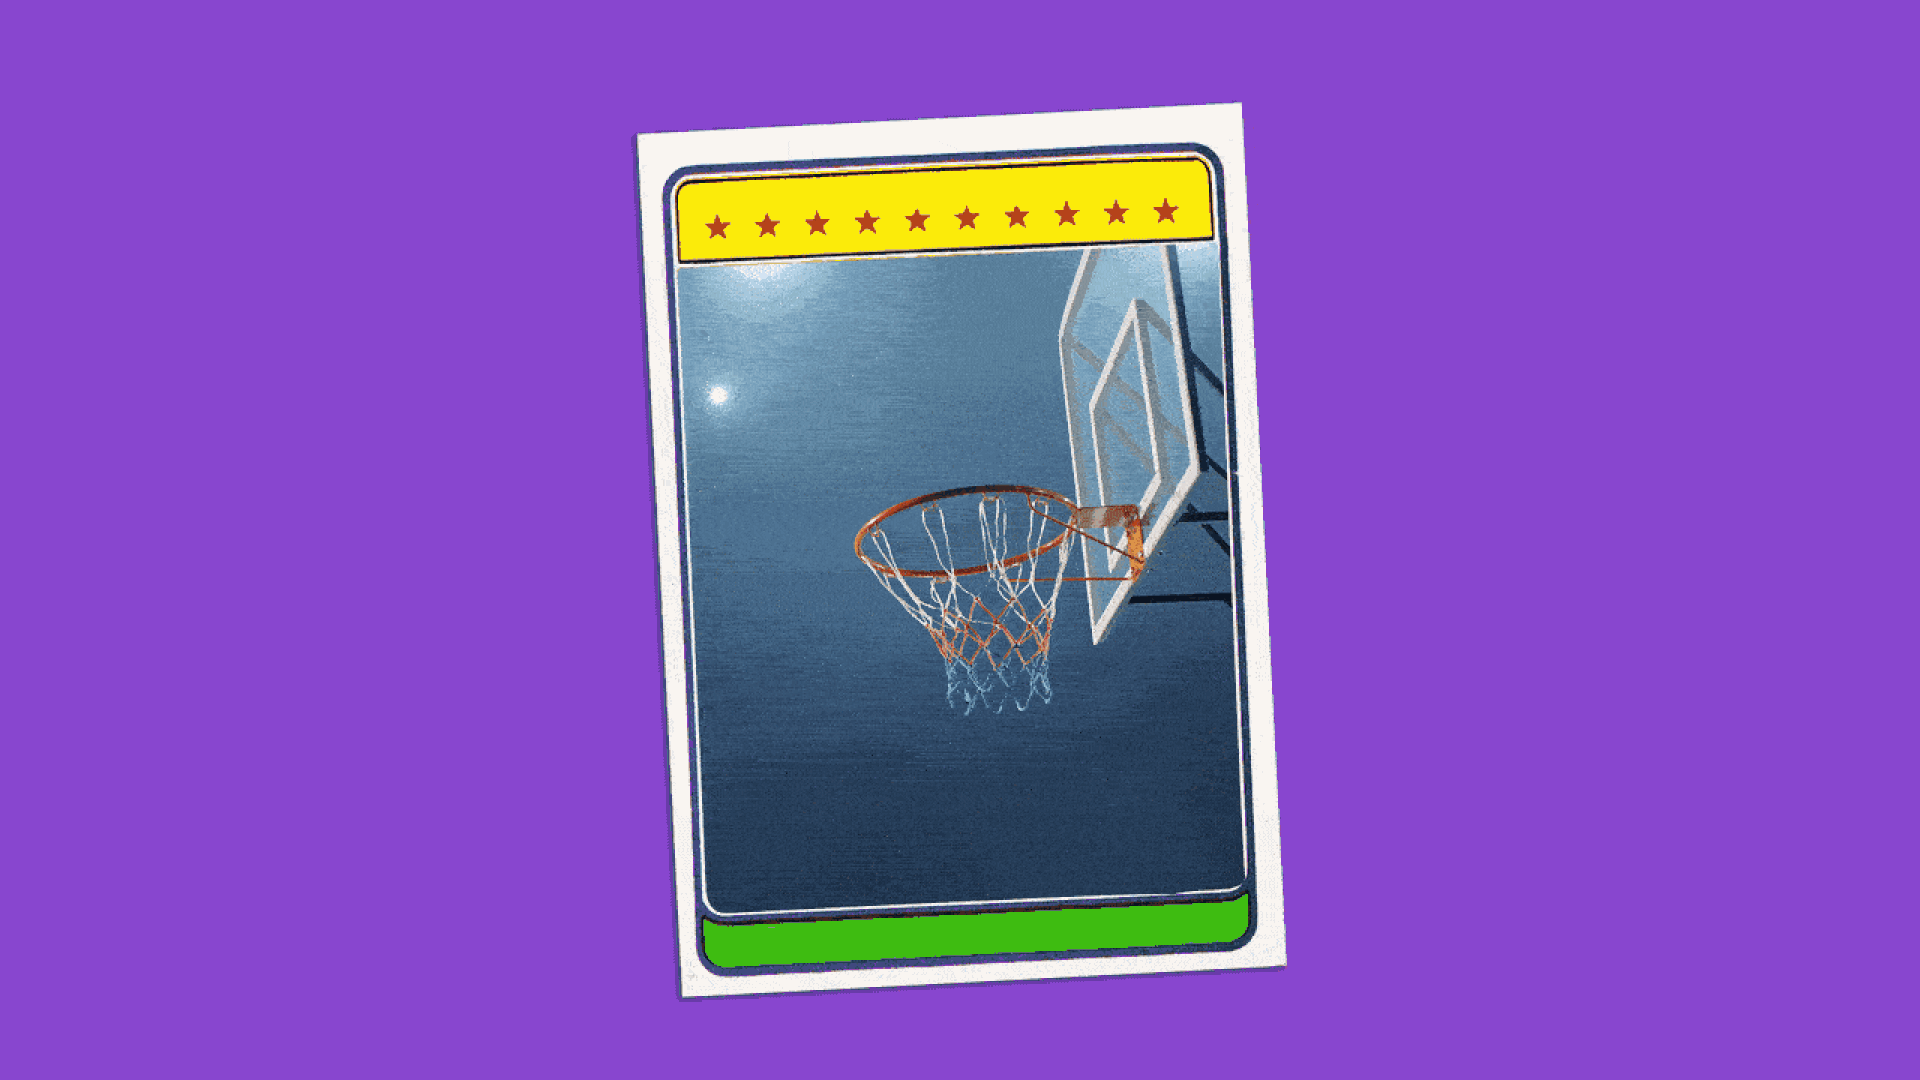 Illustration of a basketball trading card showing an animated video of a slam dunk.